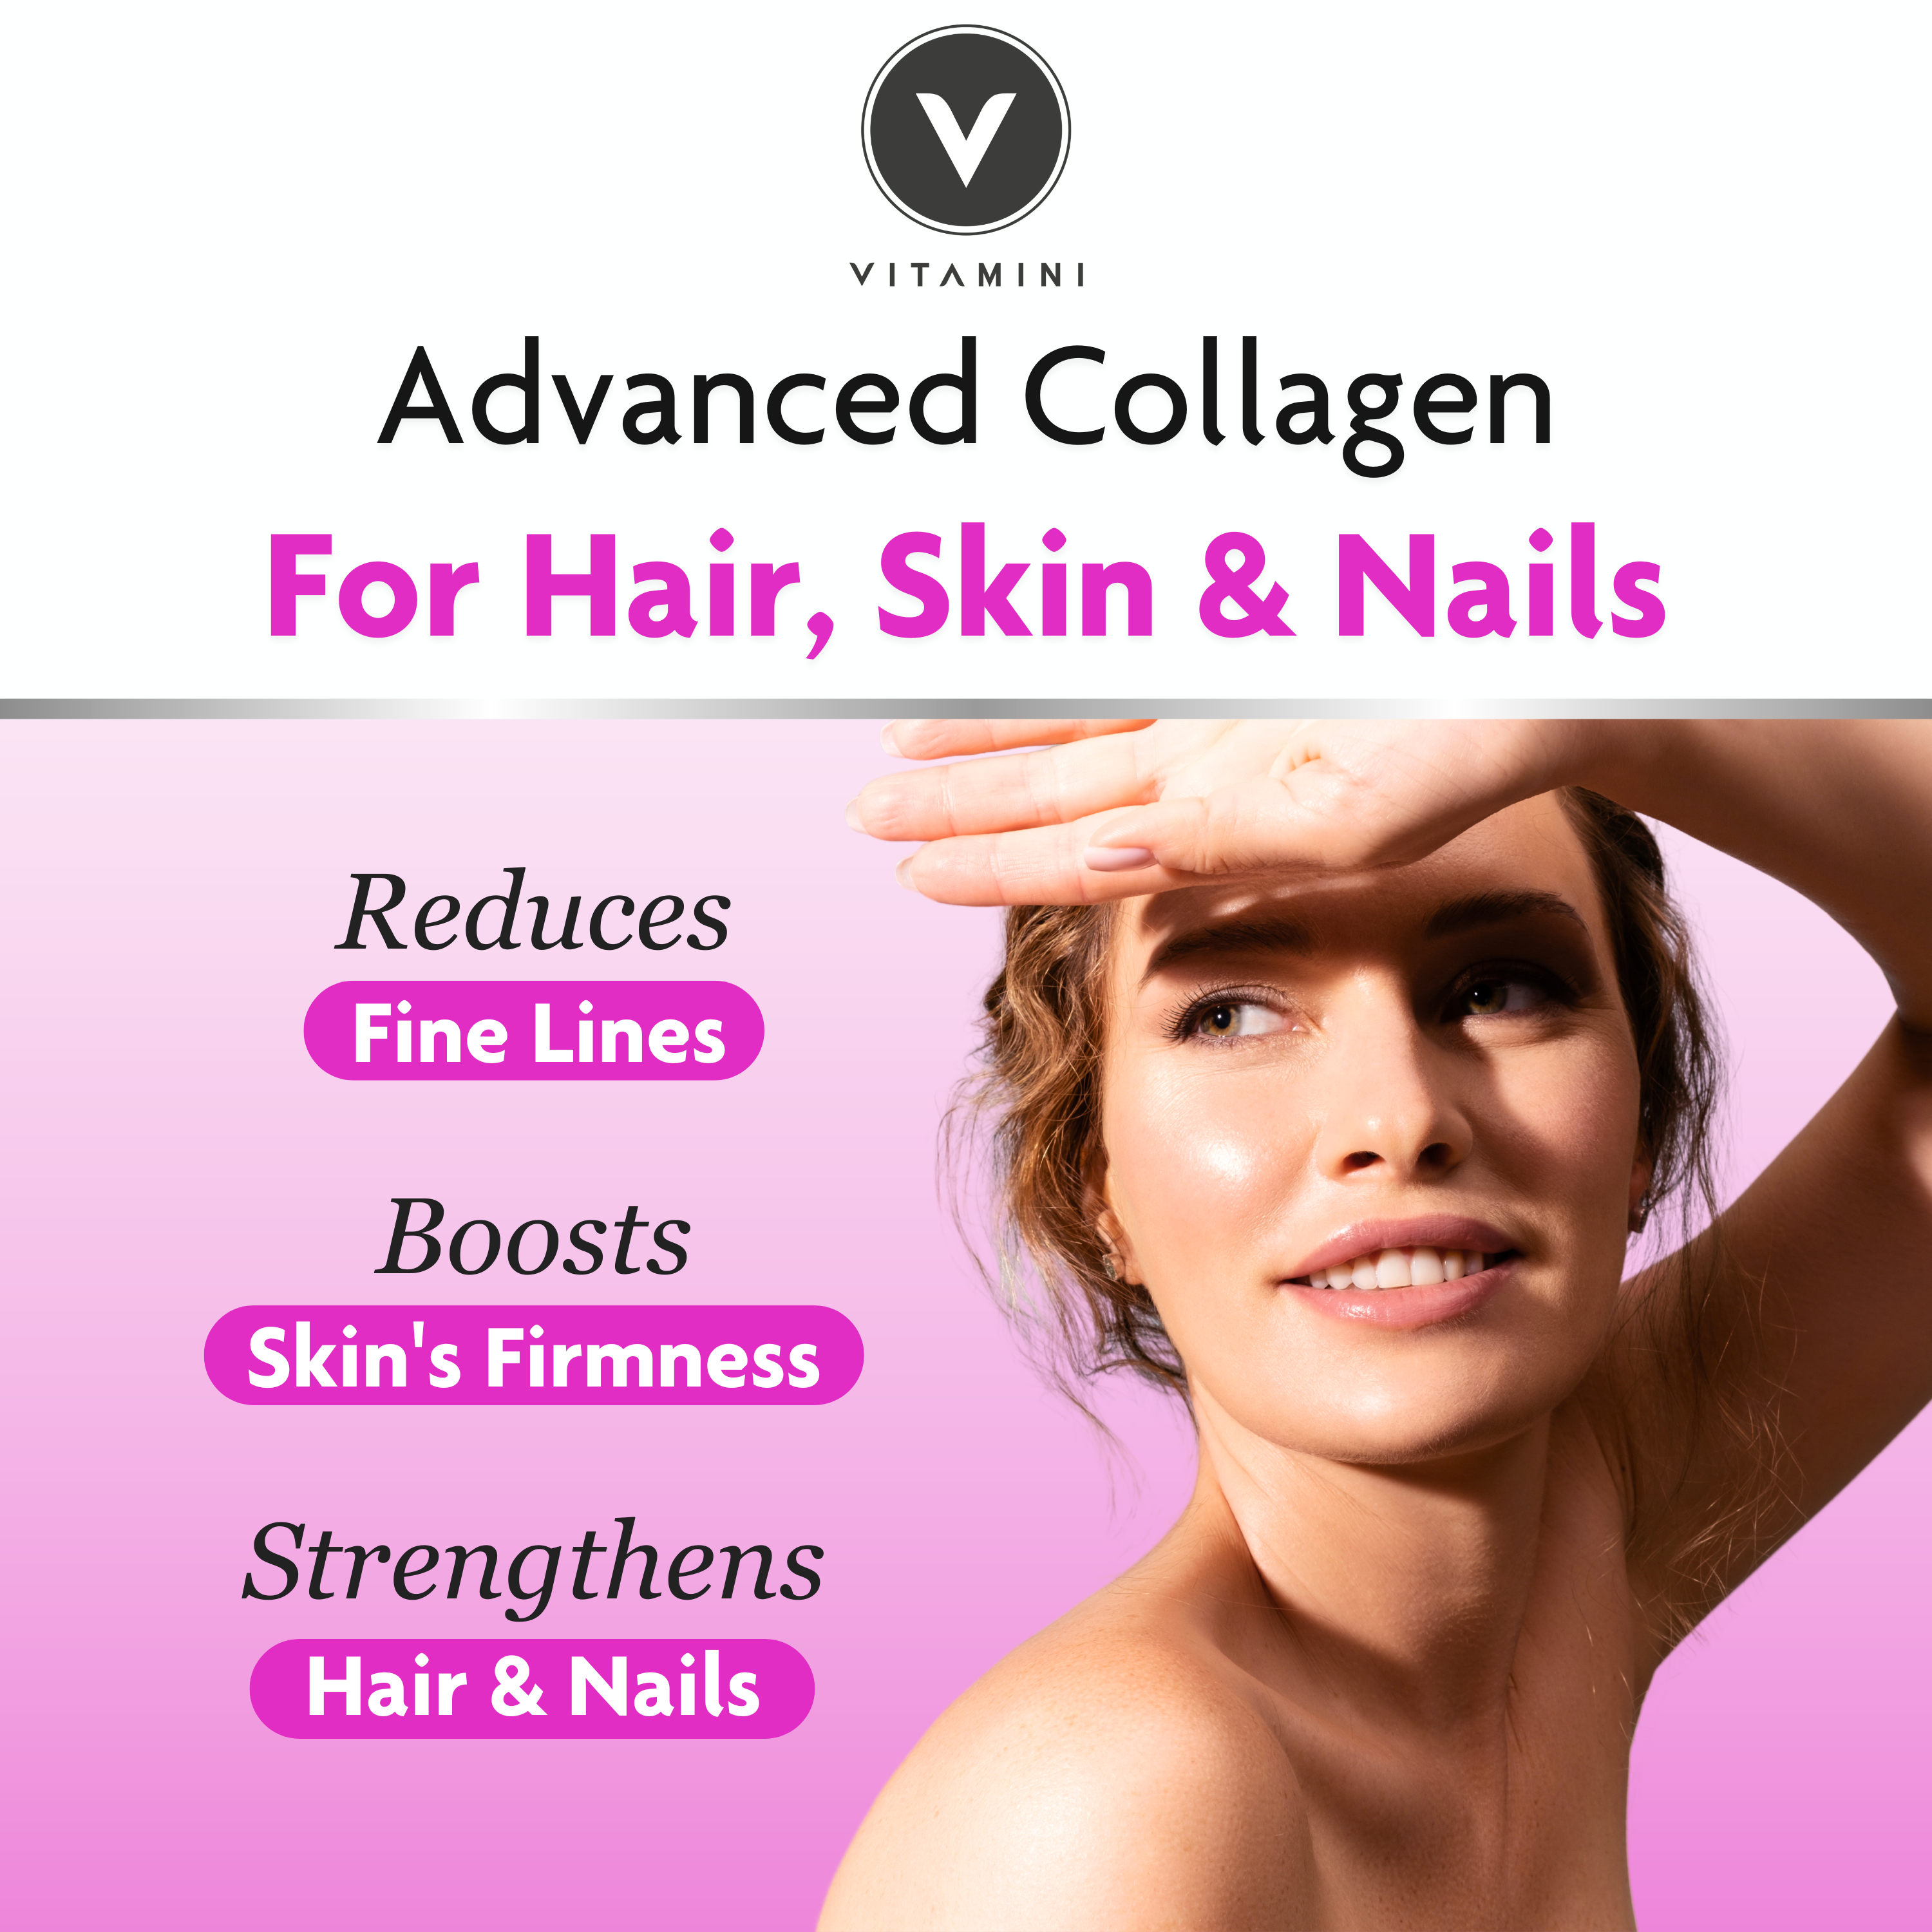 Advanced Collagen for Hair, Skin & Nails